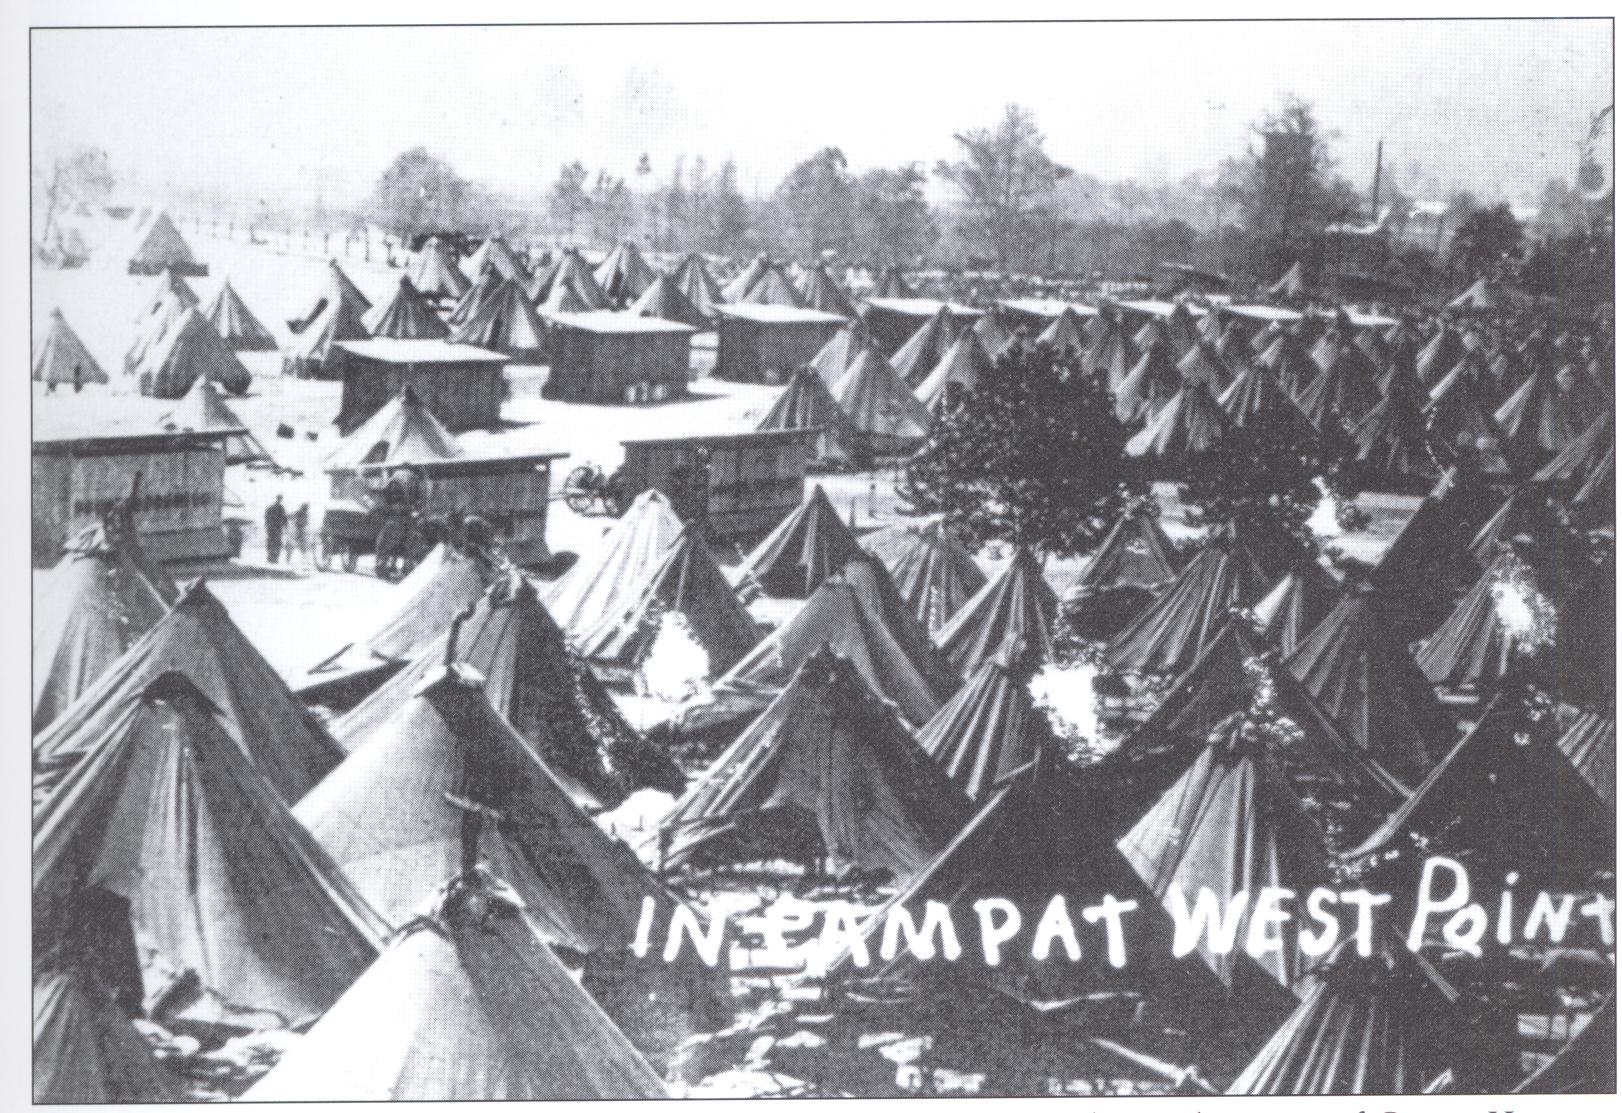 Camp Knox West Point image photo